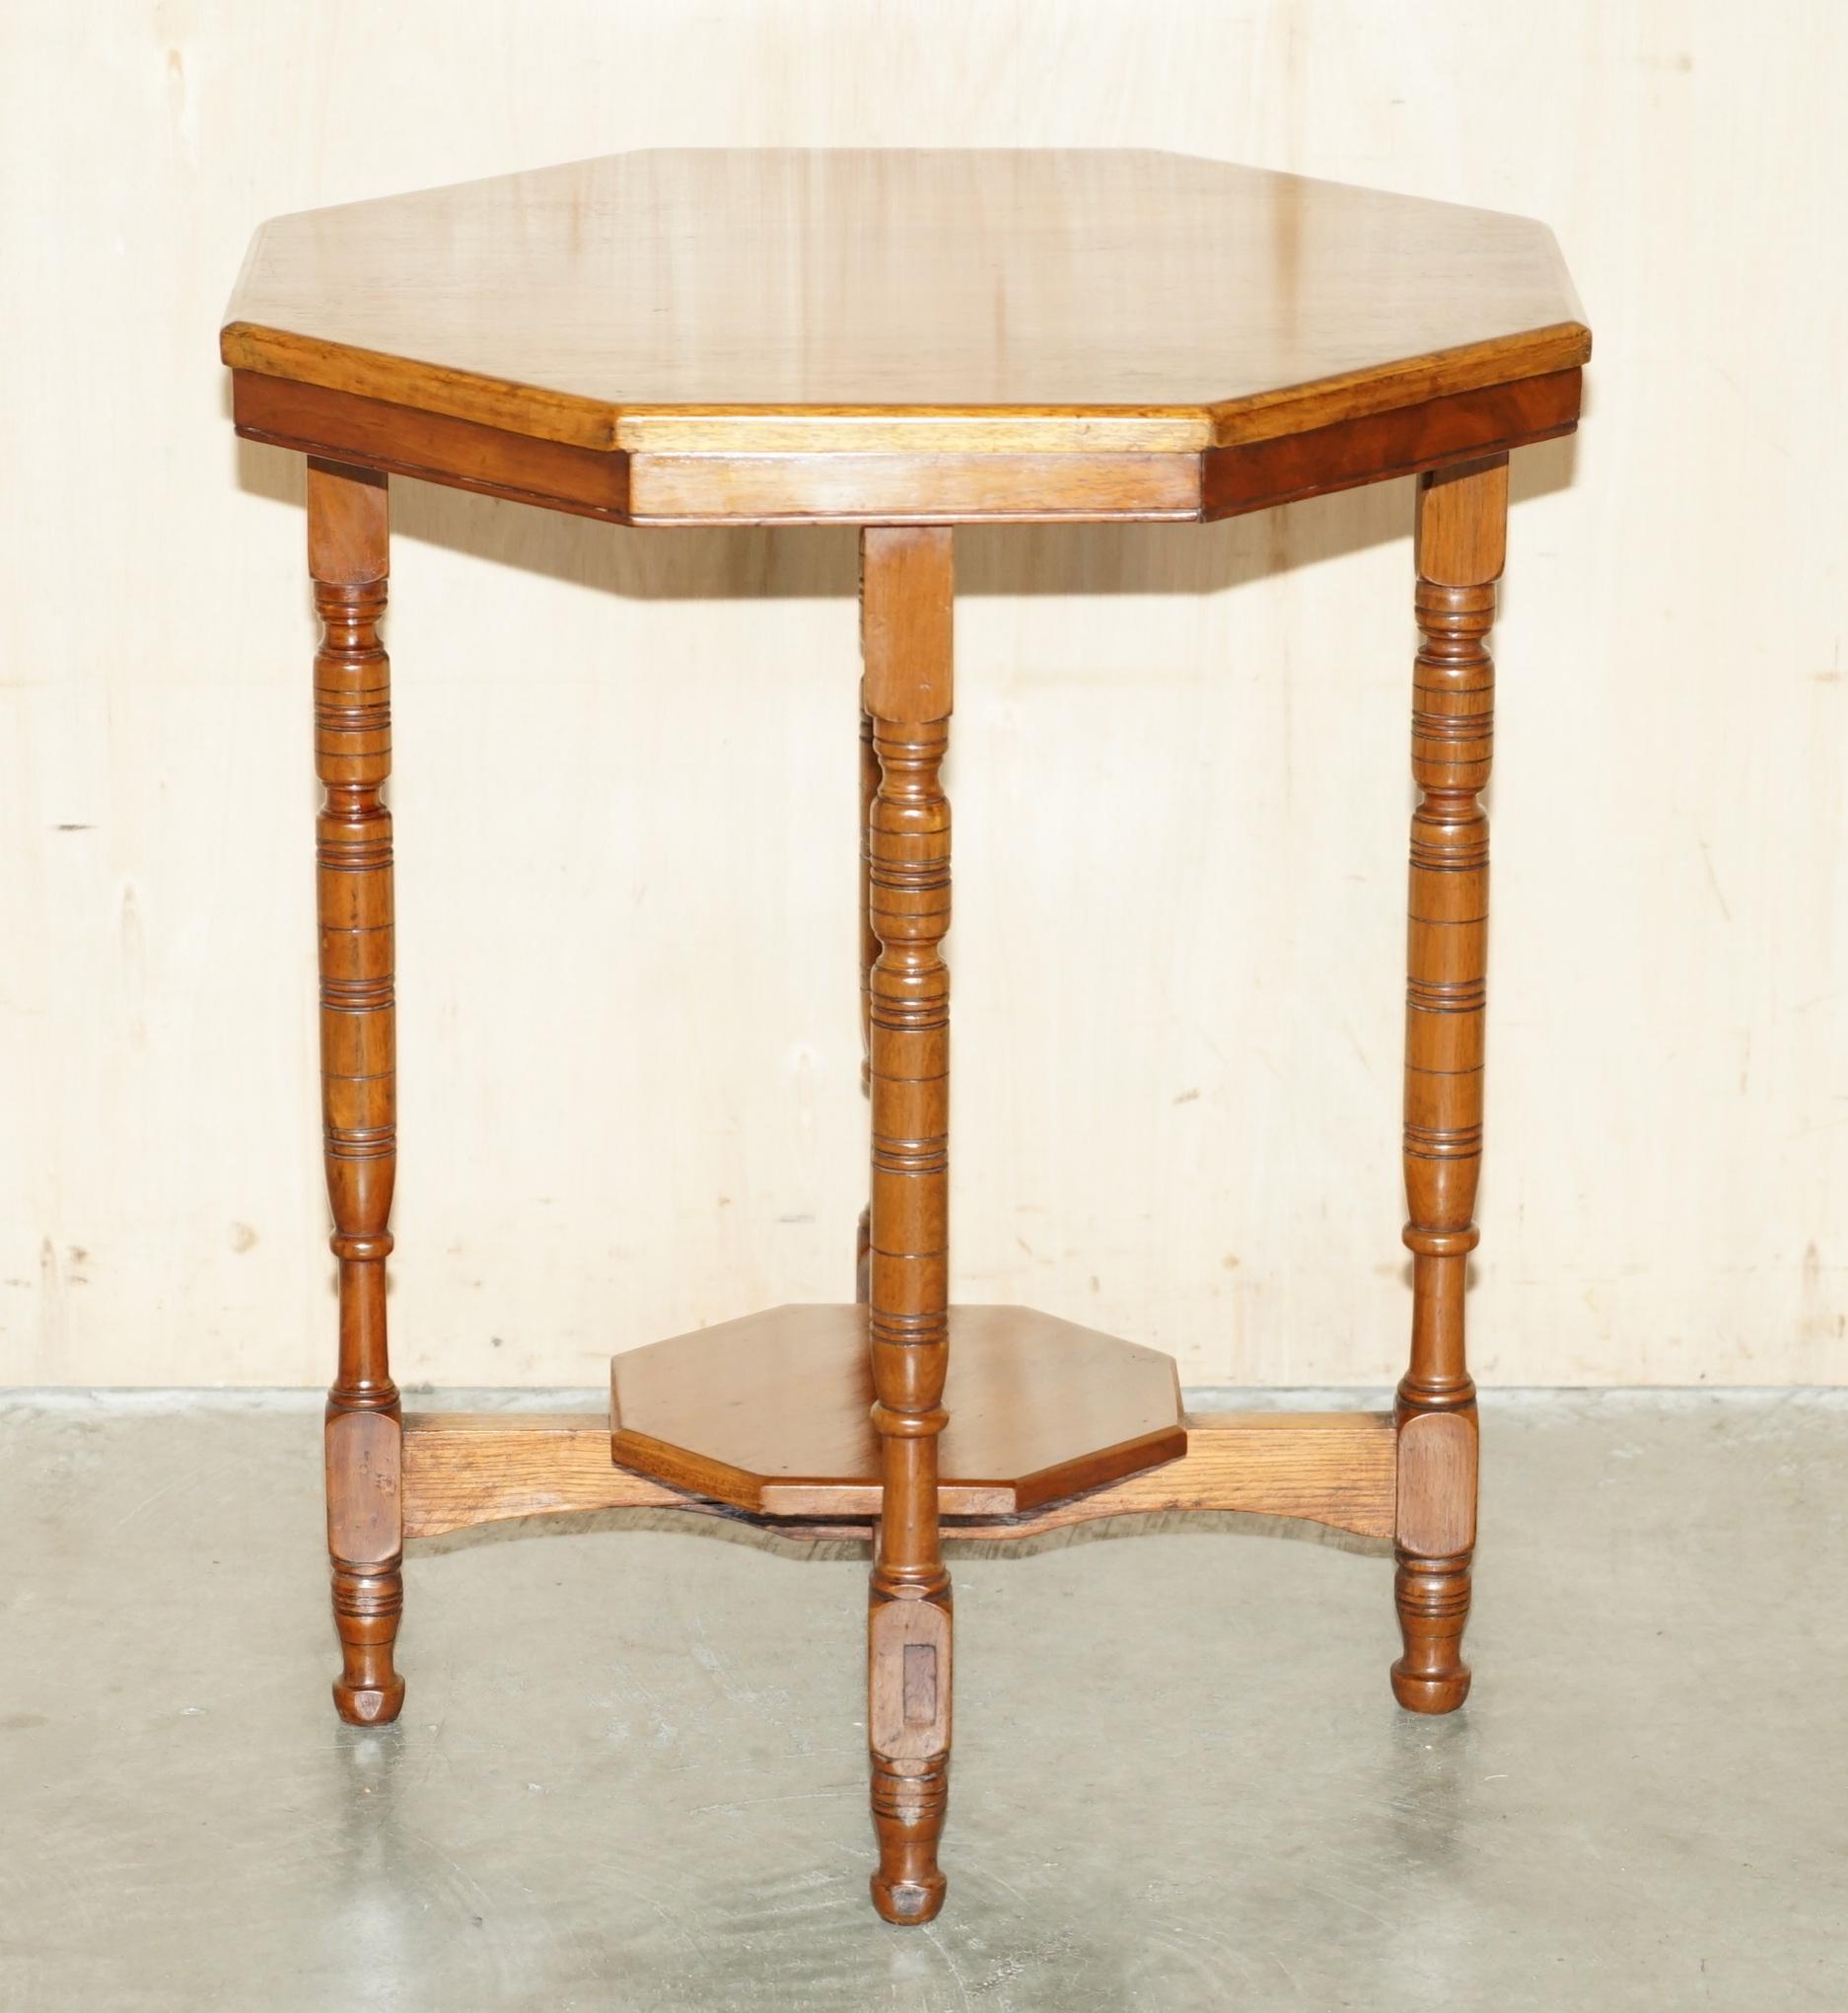 Royal House Antiques

Royal House Antiques is delighted to offer for sale this lovely circa 1880-1900 English Mahogany large side or small center table with ornately turned legs 

Please note the delivery fee listed is just a guide, it covers within